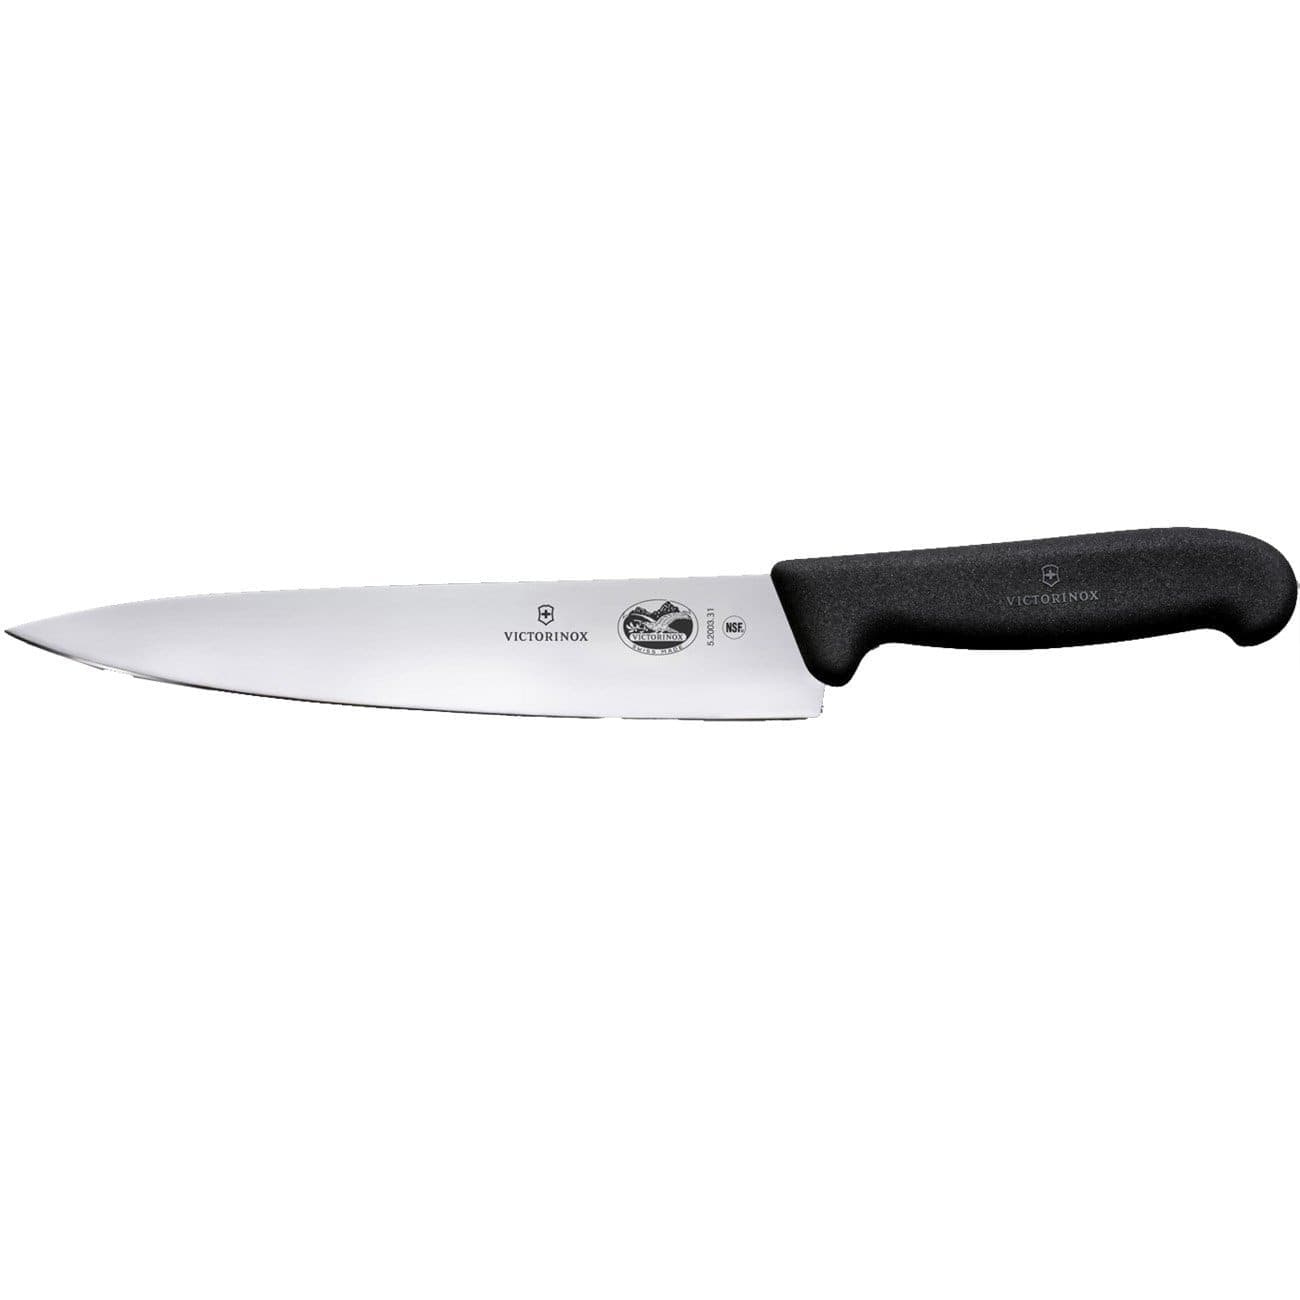 Victorinox Carving 12 Inch Fibrox Pro Chef's Knife - 5.2003.31 - Jashanmal Home